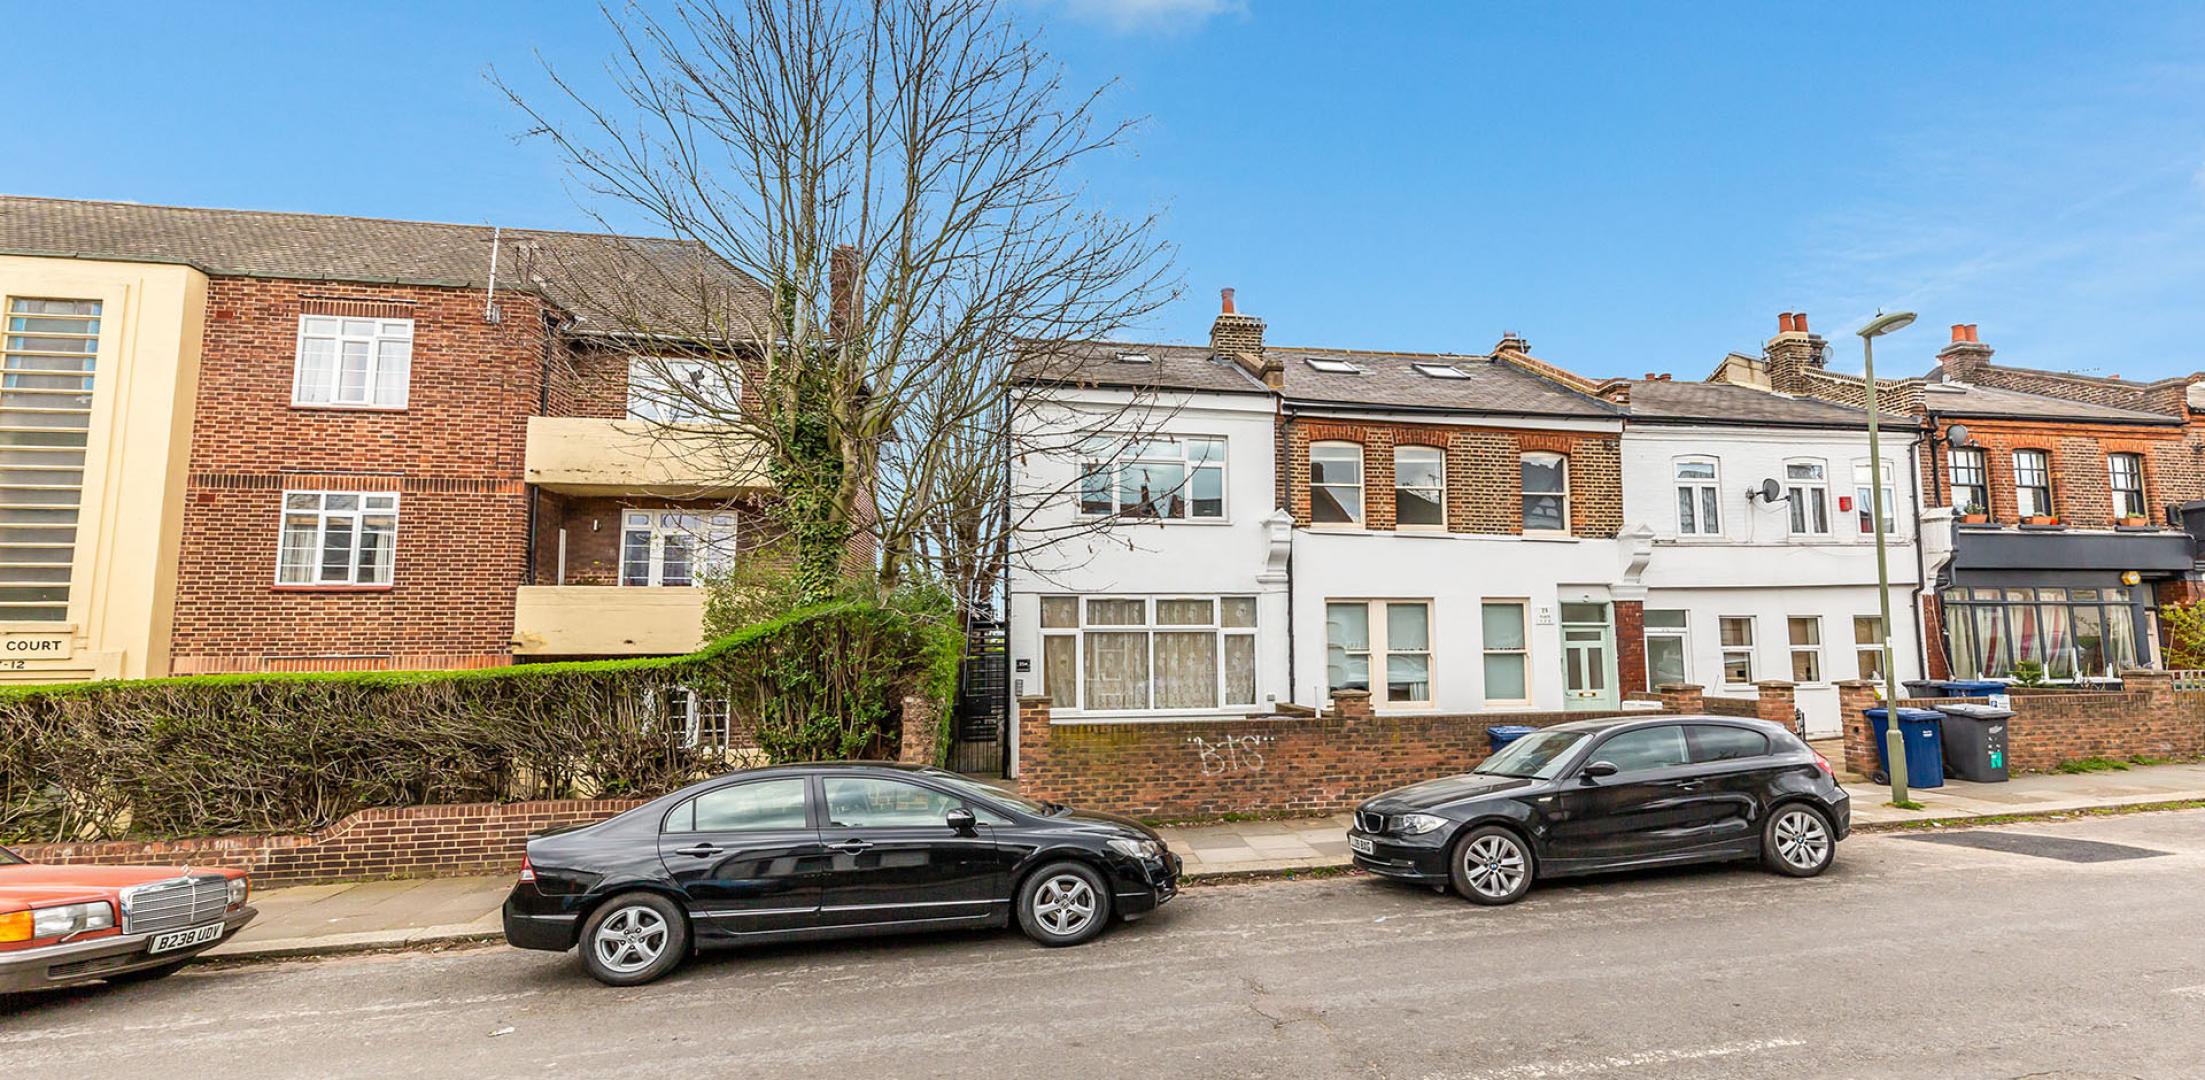 			NEW INSTRUCTION!, 1 Bedroom, 1 bath, 1 reception Flat			 Wetherill Road, MUSWELL HILL